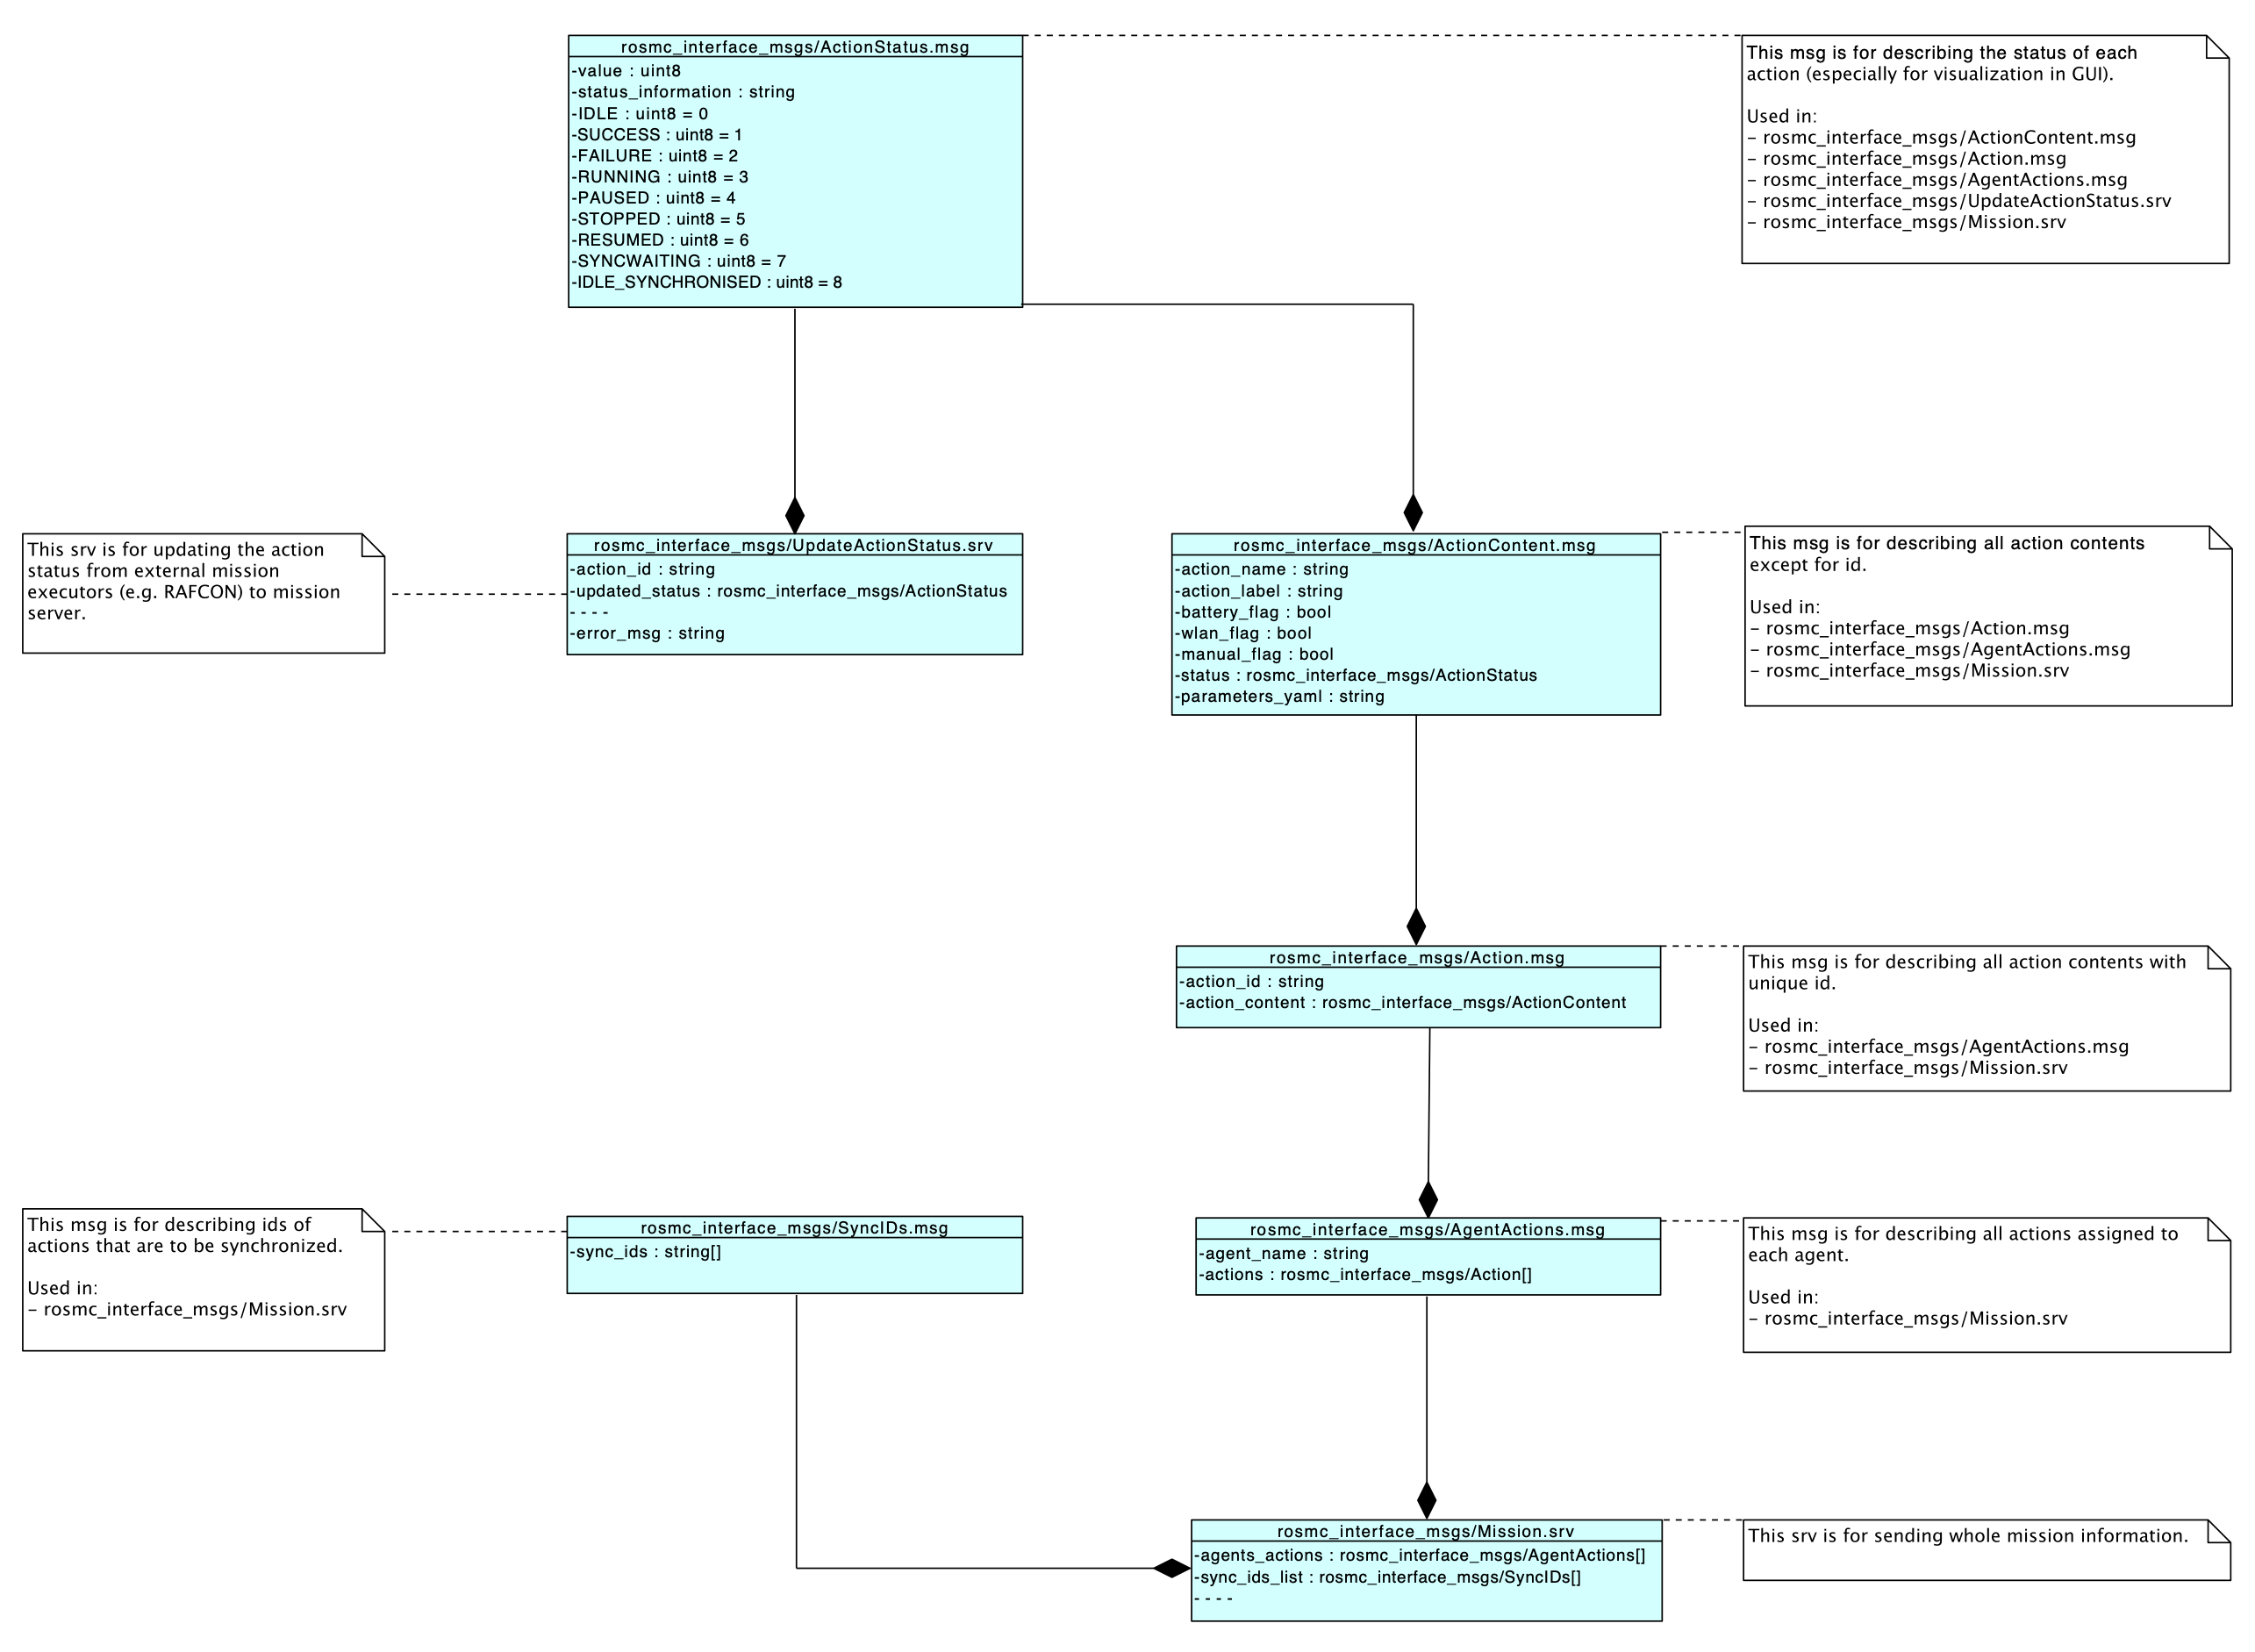 Class diagram of Mission.srv